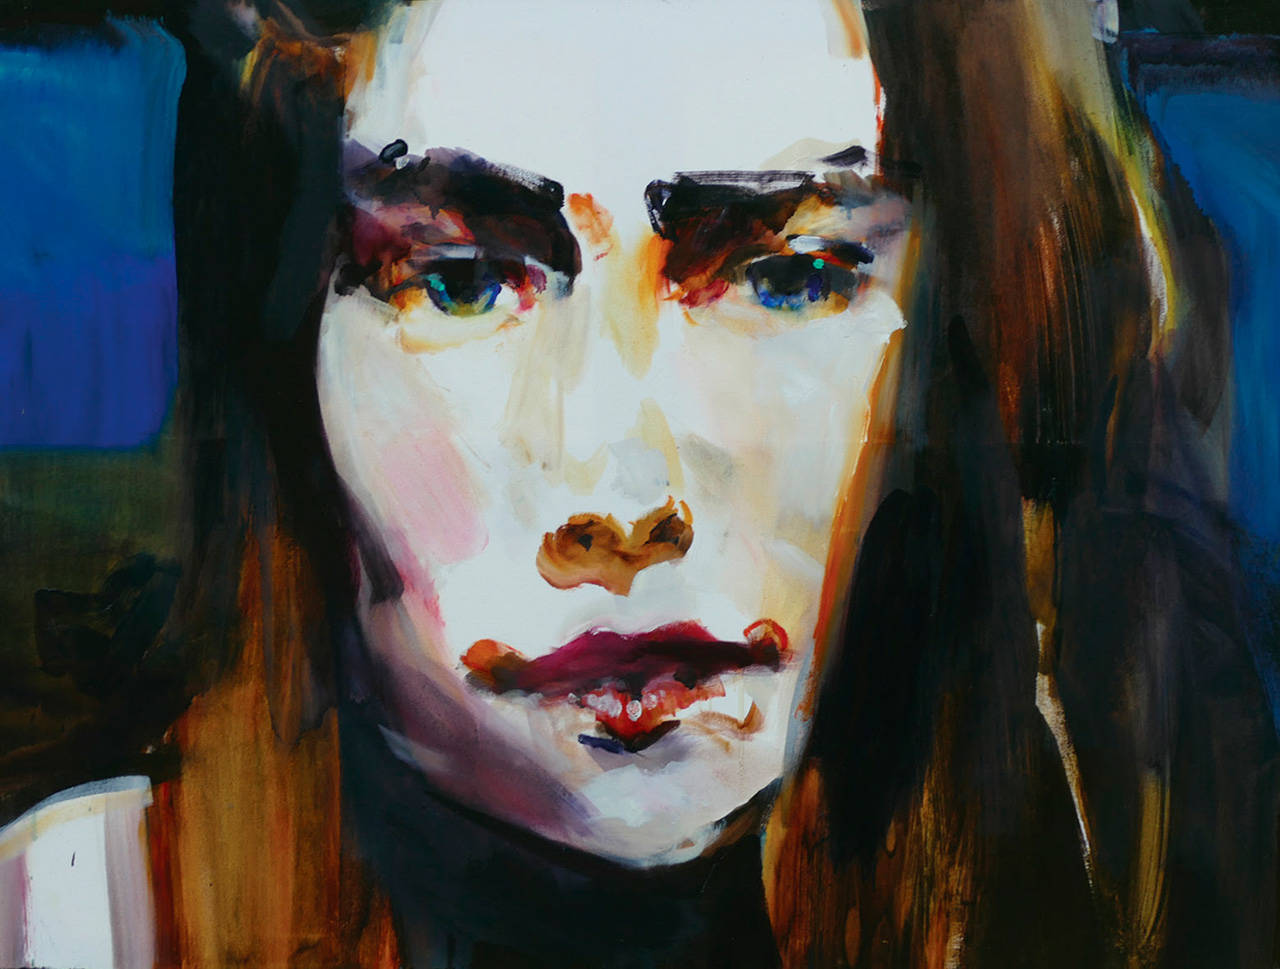 “Portrait with Blue Eyes” by Adam Grosowsky (36x48, oil on canvas). Image courtesy of Roby King Gallery | Adam Grosowsky